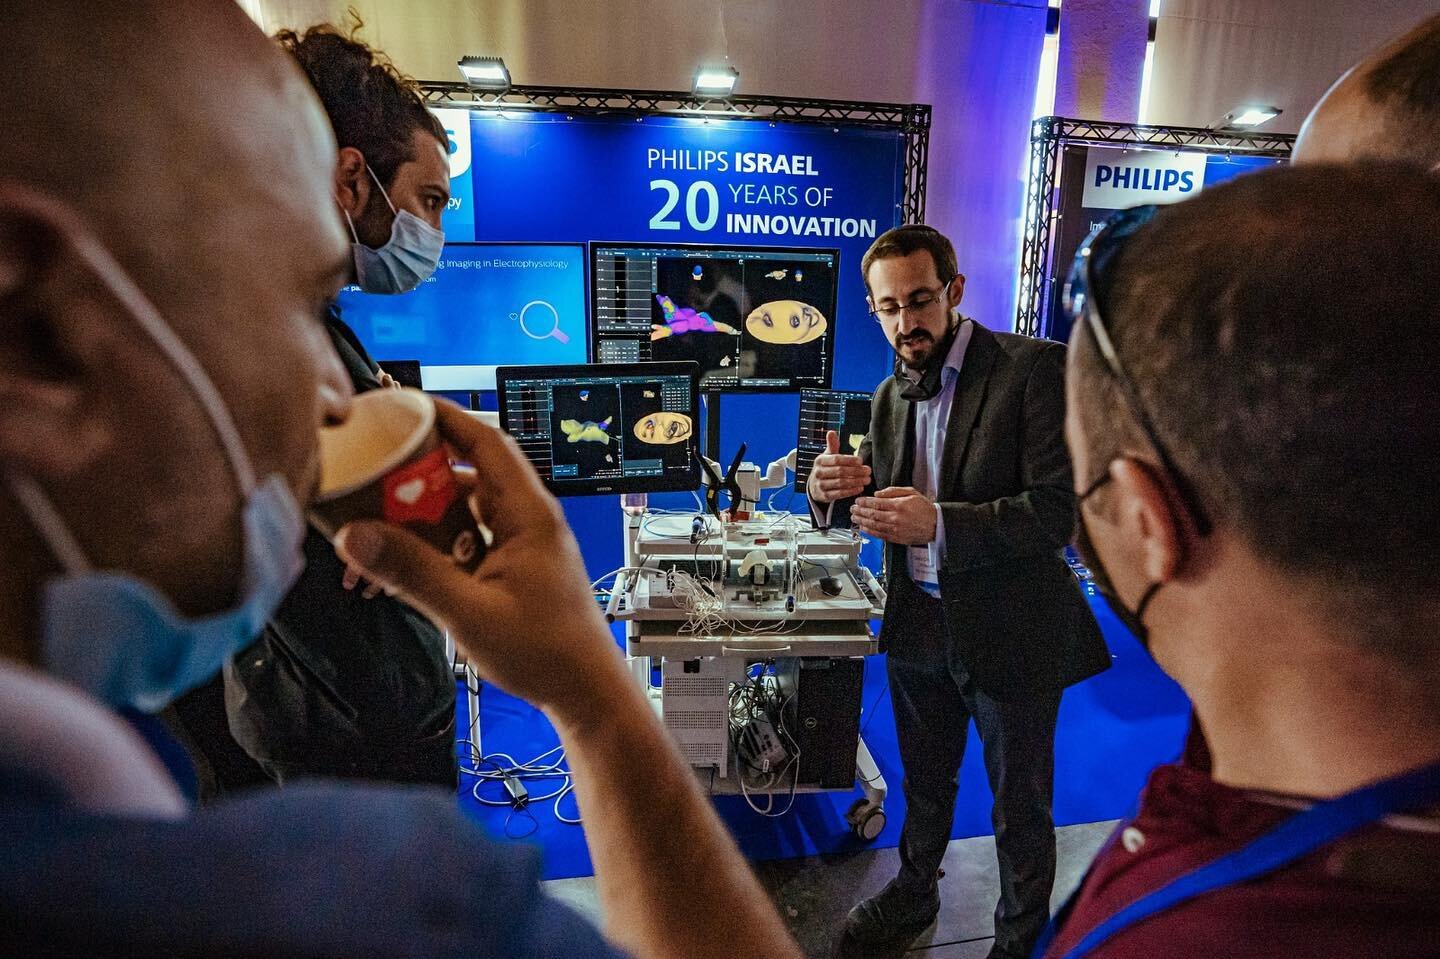 Was amazing to represent EPD and celebrate this week, 20 years of Philips Israel
innovations!!
#EPDsolutions #philipshealthcare #innovationinhealthcare